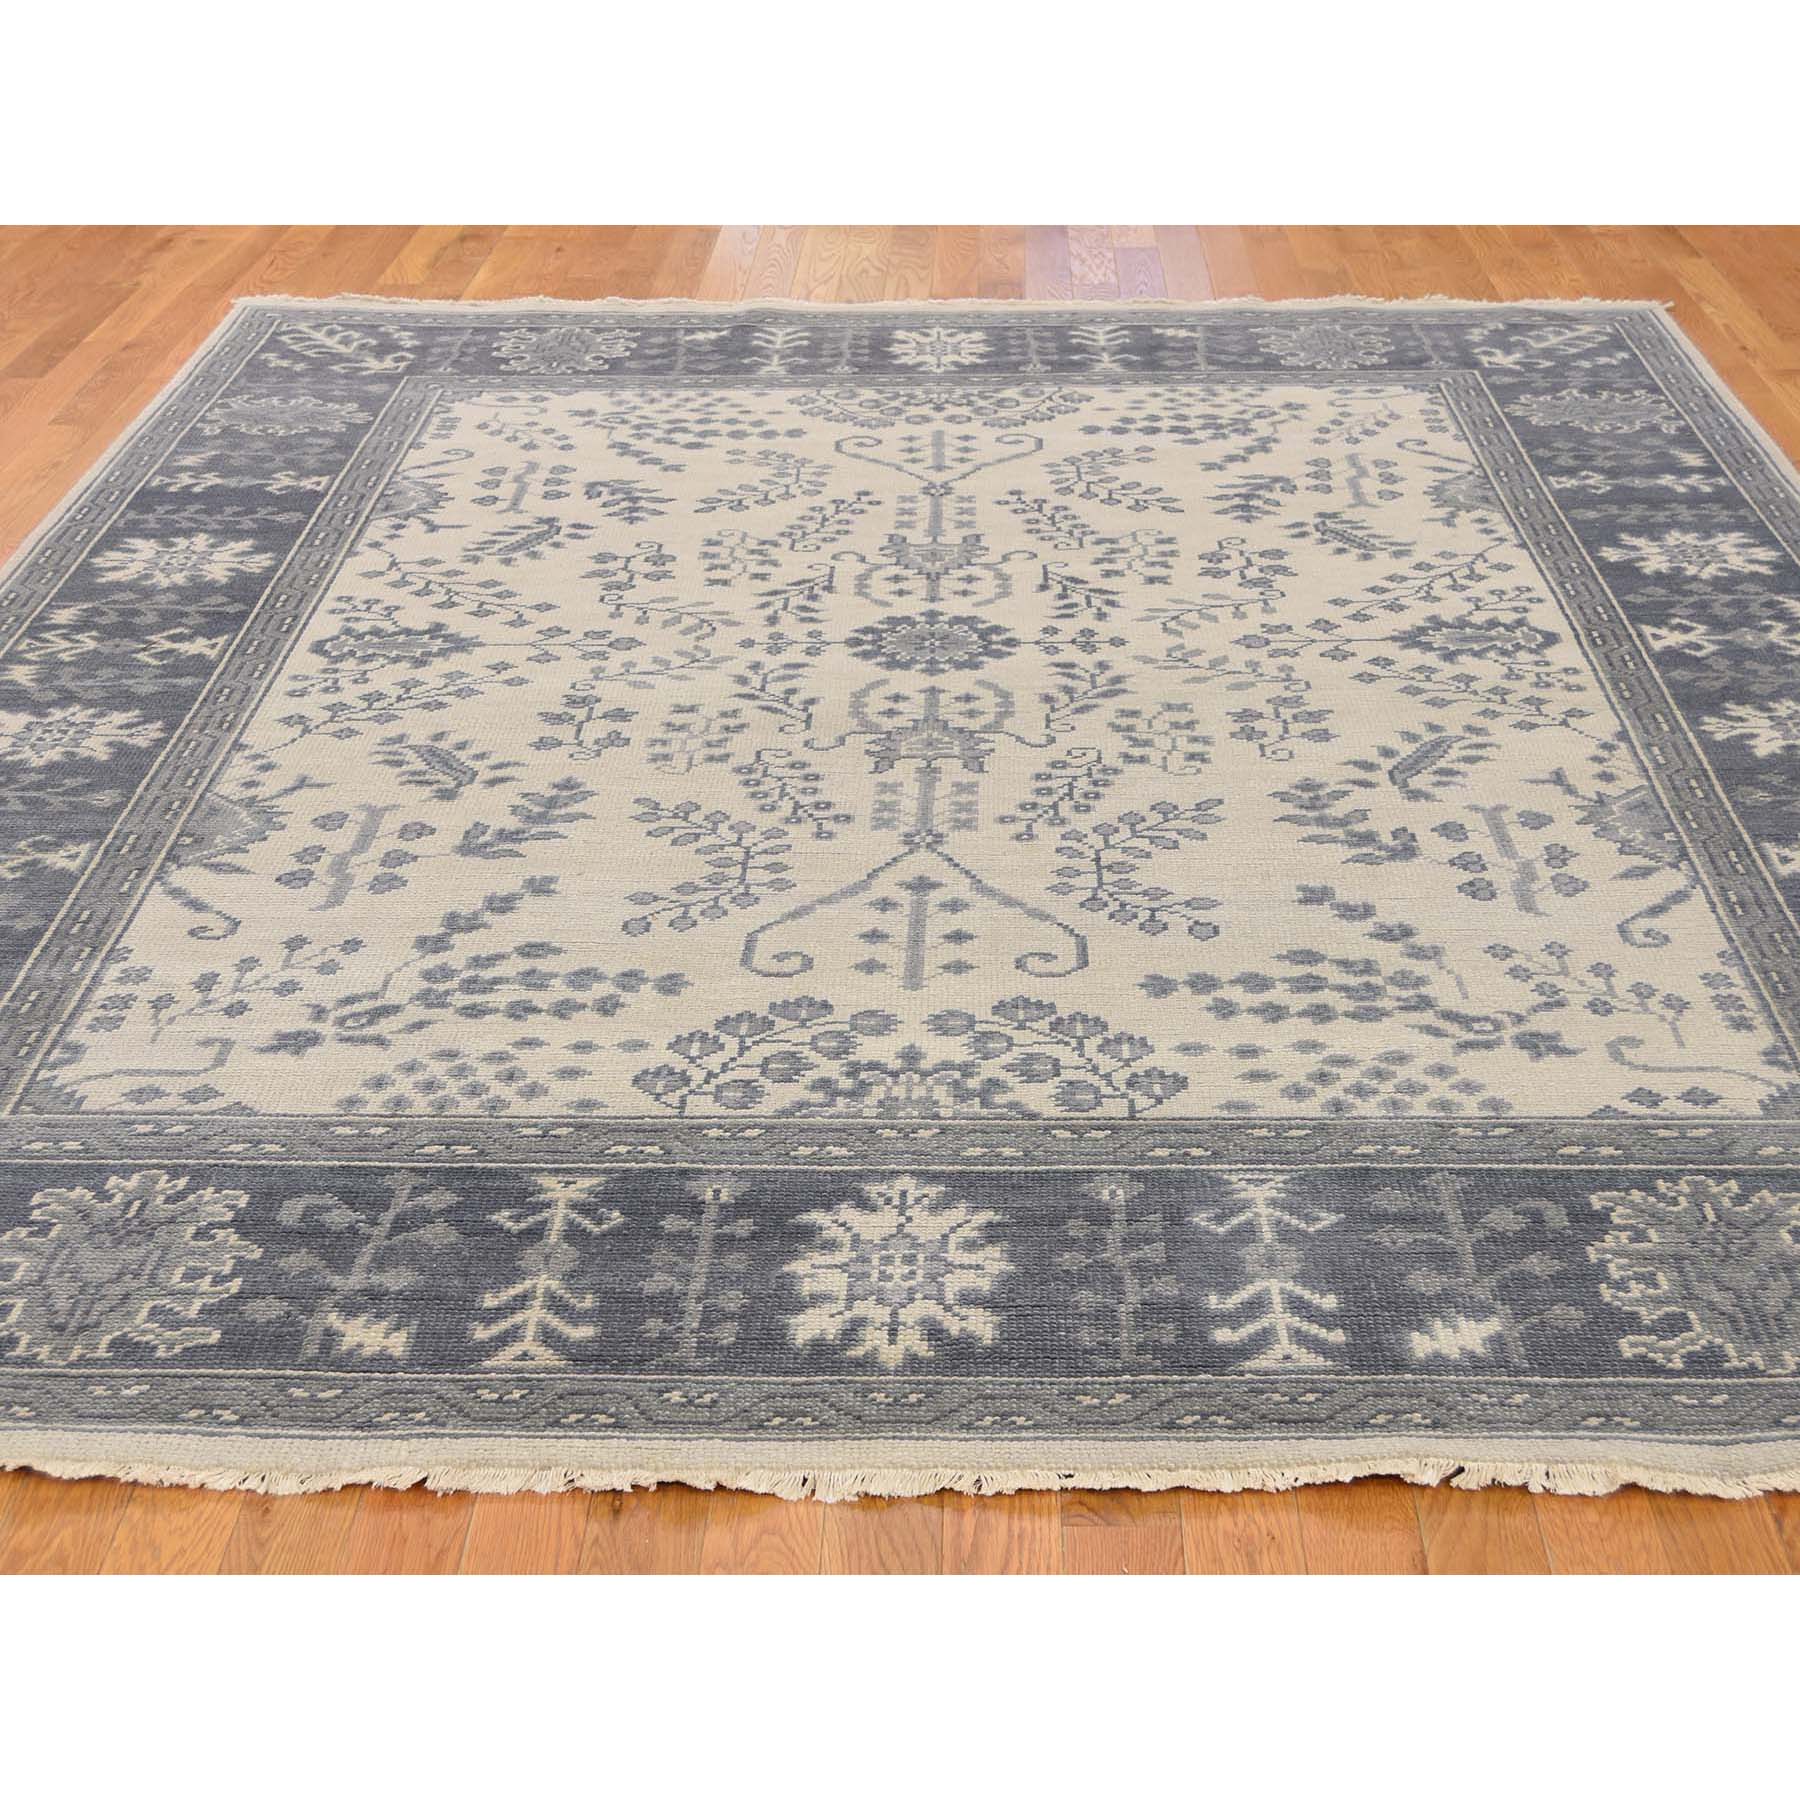 8-1 x9-10  Hand-Knotted Turkish Knot Oushak Pure Wool Oriental Rug 